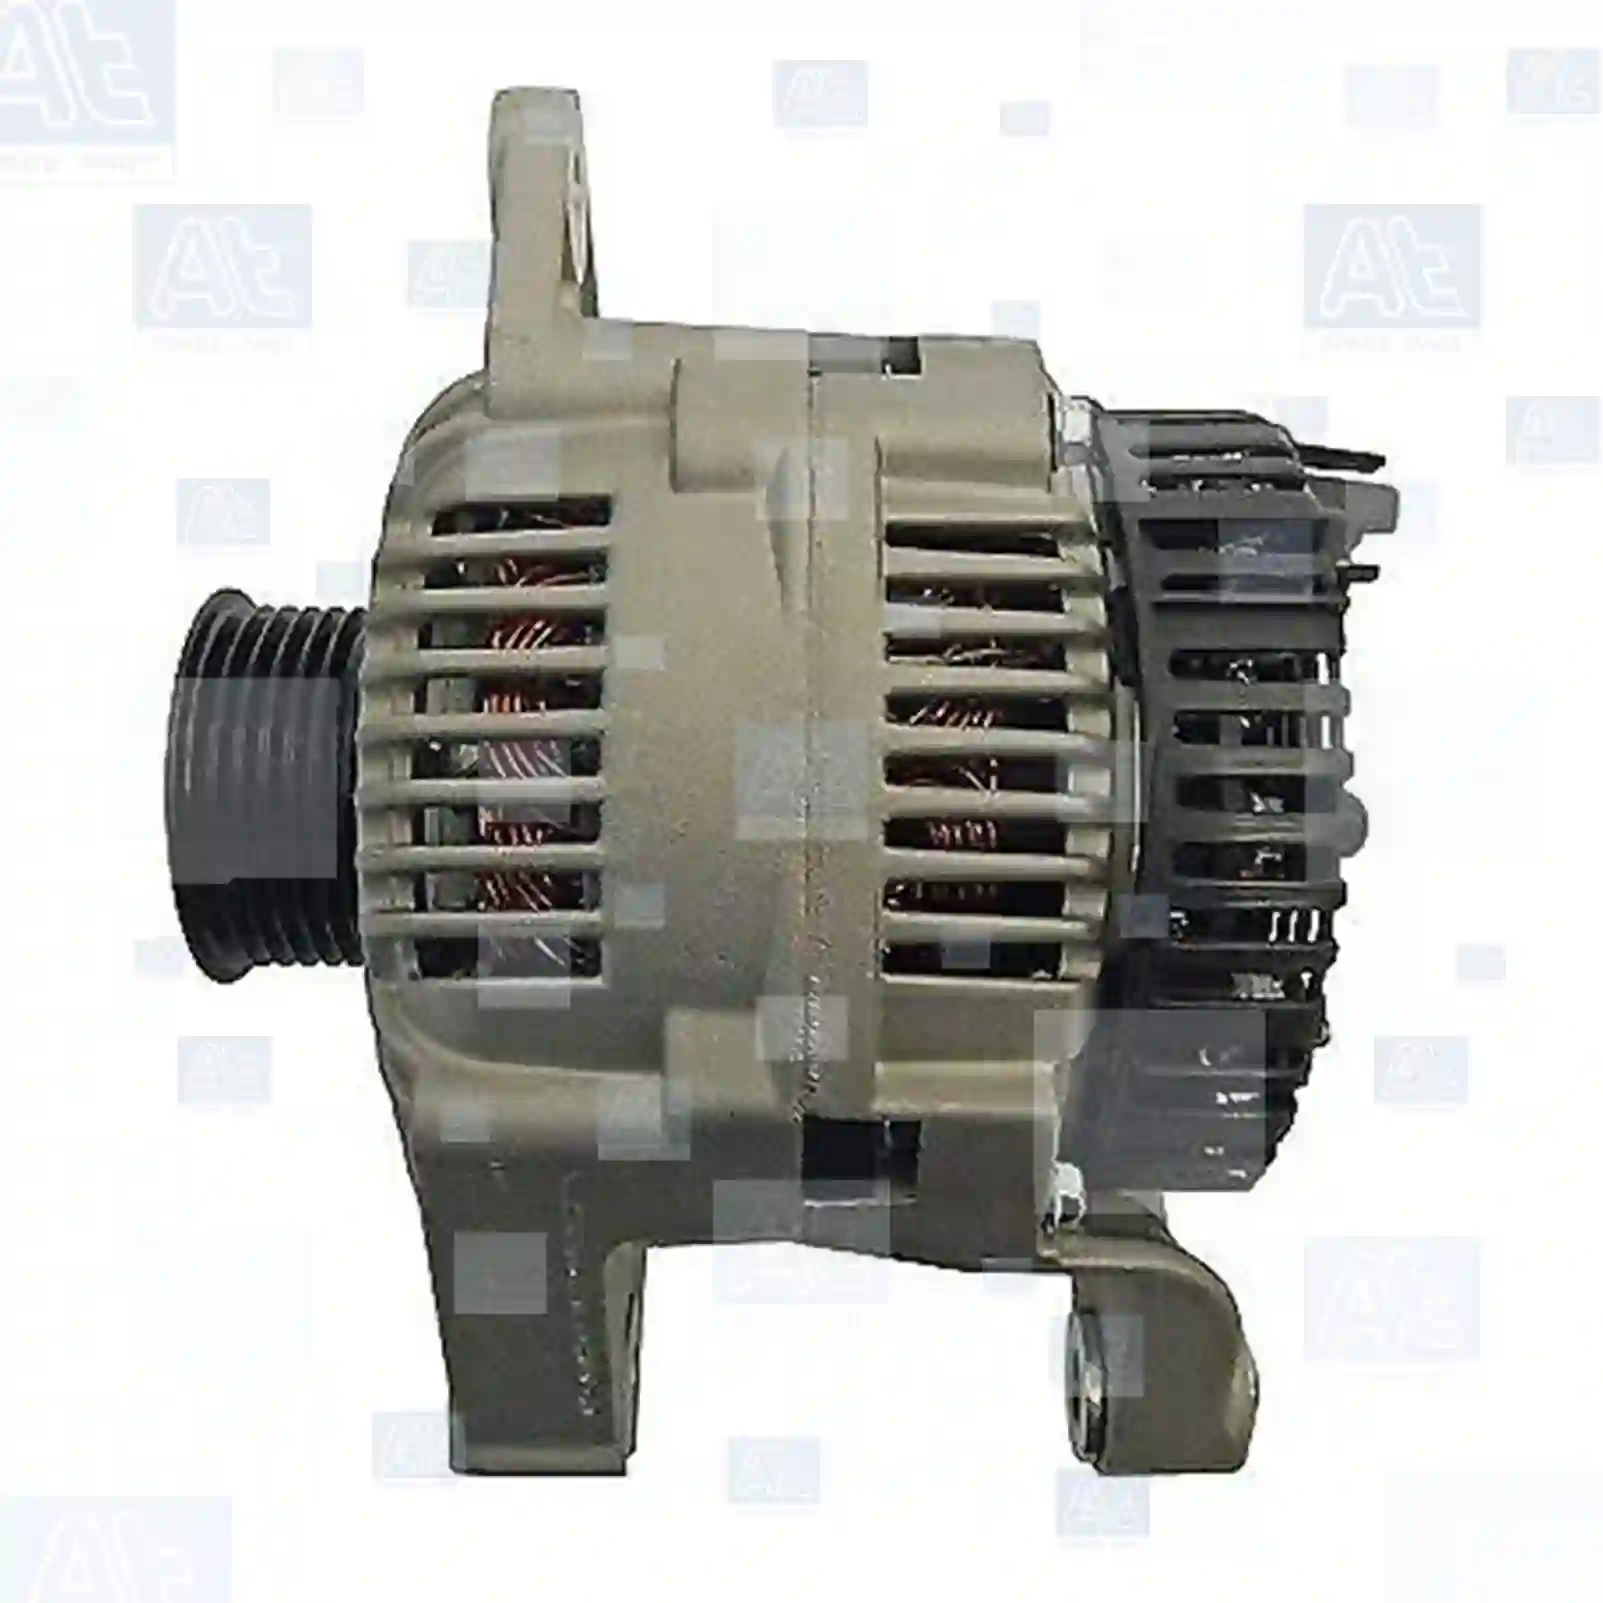 Alternator, 77711544, 5701A8, 5705A3, 5705A4, 5705E7, 5705FR, 5705G5, 5705G8, 5705H7, 5705HG, 5705HN, 5705J8, 5705N7, 5706J2, 5707C6, 9566774680, 9603552680, 9610382280, 9610601580, 9610601880, 9610870880, 9610870980, 9615715880, 9615735880, 9616862980, 9617376180, 9618673980, 9619333080, 9619333280, 9631318680, 9610601580, 9616862980, 9619333080, 9631318680, 9610601580, 9610601880, 9616862980, 9619333080, 9619333280, 9631318680, 96103822, 9610601580, 9616862980, 9619333080, 9631318680, SA216, 5701A8, 5705A3, 5705A4, 5705E7, 5705FR, 5705G5, 5705G8, 5705H7, 5705HG, 5705HN, 5705J8, 5705N7, 5706J2, 5707C6, 9566774680, 9603552680, 9610382280, 9610601580, 9610601880, 9610870880, 9610870980, 9615715880, 9615735880, 9616862980, 9617376180, 9618673980, 9619333080, 9619333280, 9631318680 ||  77711544 At Spare Part | Engine, Accelerator Pedal, Camshaft, Connecting Rod, Crankcase, Crankshaft, Cylinder Head, Engine Suspension Mountings, Exhaust Manifold, Exhaust Gas Recirculation, Filter Kits, Flywheel Housing, General Overhaul Kits, Engine, Intake Manifold, Oil Cleaner, Oil Cooler, Oil Filter, Oil Pump, Oil Sump, Piston & Liner, Sensor & Switch, Timing Case, Turbocharger, Cooling System, Belt Tensioner, Coolant Filter, Coolant Pipe, Corrosion Prevention Agent, Drive, Expansion Tank, Fan, Intercooler, Monitors & Gauges, Radiator, Thermostat, V-Belt / Timing belt, Water Pump, Fuel System, Electronical Injector Unit, Feed Pump, Fuel Filter, cpl., Fuel Gauge Sender,  Fuel Line, Fuel Pump, Fuel Tank, Injection Line Kit, Injection Pump, Exhaust System, Clutch & Pedal, Gearbox, Propeller Shaft, Axles, Brake System, Hubs & Wheels, Suspension, Leaf Spring, Universal Parts / Accessories, Steering, Electrical System, Cabin Alternator, 77711544, 5701A8, 5705A3, 5705A4, 5705E7, 5705FR, 5705G5, 5705G8, 5705H7, 5705HG, 5705HN, 5705J8, 5705N7, 5706J2, 5707C6, 9566774680, 9603552680, 9610382280, 9610601580, 9610601880, 9610870880, 9610870980, 9615715880, 9615735880, 9616862980, 9617376180, 9618673980, 9619333080, 9619333280, 9631318680, 9610601580, 9616862980, 9619333080, 9631318680, 9610601580, 9610601880, 9616862980, 9619333080, 9619333280, 9631318680, 96103822, 9610601580, 9616862980, 9619333080, 9631318680, SA216, 5701A8, 5705A3, 5705A4, 5705E7, 5705FR, 5705G5, 5705G8, 5705H7, 5705HG, 5705HN, 5705J8, 5705N7, 5706J2, 5707C6, 9566774680, 9603552680, 9610382280, 9610601580, 9610601880, 9610870880, 9610870980, 9615715880, 9615735880, 9616862980, 9617376180, 9618673980, 9619333080, 9619333280, 9631318680 ||  77711544 At Spare Part | Engine, Accelerator Pedal, Camshaft, Connecting Rod, Crankcase, Crankshaft, Cylinder Head, Engine Suspension Mountings, Exhaust Manifold, Exhaust Gas Recirculation, Filter Kits, Flywheel Housing, General Overhaul Kits, Engine, Intake Manifold, Oil Cleaner, Oil Cooler, Oil Filter, Oil Pump, Oil Sump, Piston & Liner, Sensor & Switch, Timing Case, Turbocharger, Cooling System, Belt Tensioner, Coolant Filter, Coolant Pipe, Corrosion Prevention Agent, Drive, Expansion Tank, Fan, Intercooler, Monitors & Gauges, Radiator, Thermostat, V-Belt / Timing belt, Water Pump, Fuel System, Electronical Injector Unit, Feed Pump, Fuel Filter, cpl., Fuel Gauge Sender,  Fuel Line, Fuel Pump, Fuel Tank, Injection Line Kit, Injection Pump, Exhaust System, Clutch & Pedal, Gearbox, Propeller Shaft, Axles, Brake System, Hubs & Wheels, Suspension, Leaf Spring, Universal Parts / Accessories, Steering, Electrical System, Cabin